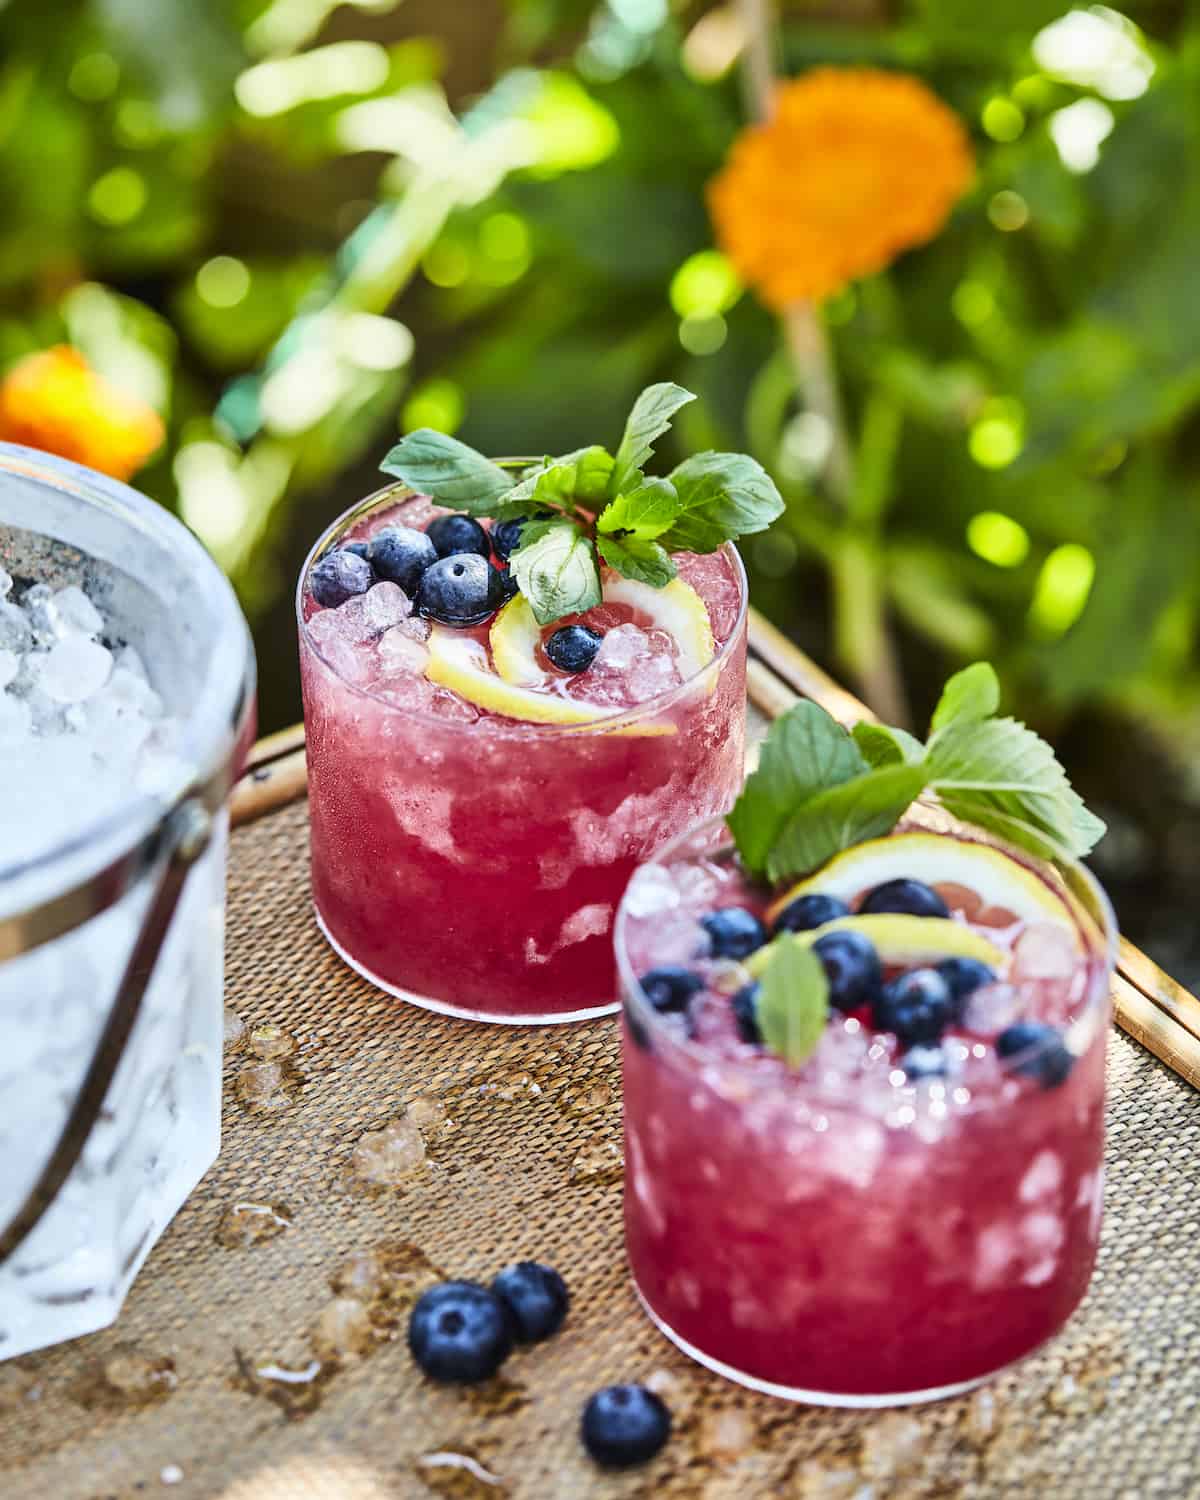 Two blueberry bourbon iced lemonades in glasses garnished with mint lemon slices and blueberries on a wooden table with an ice bucket in the left corner.